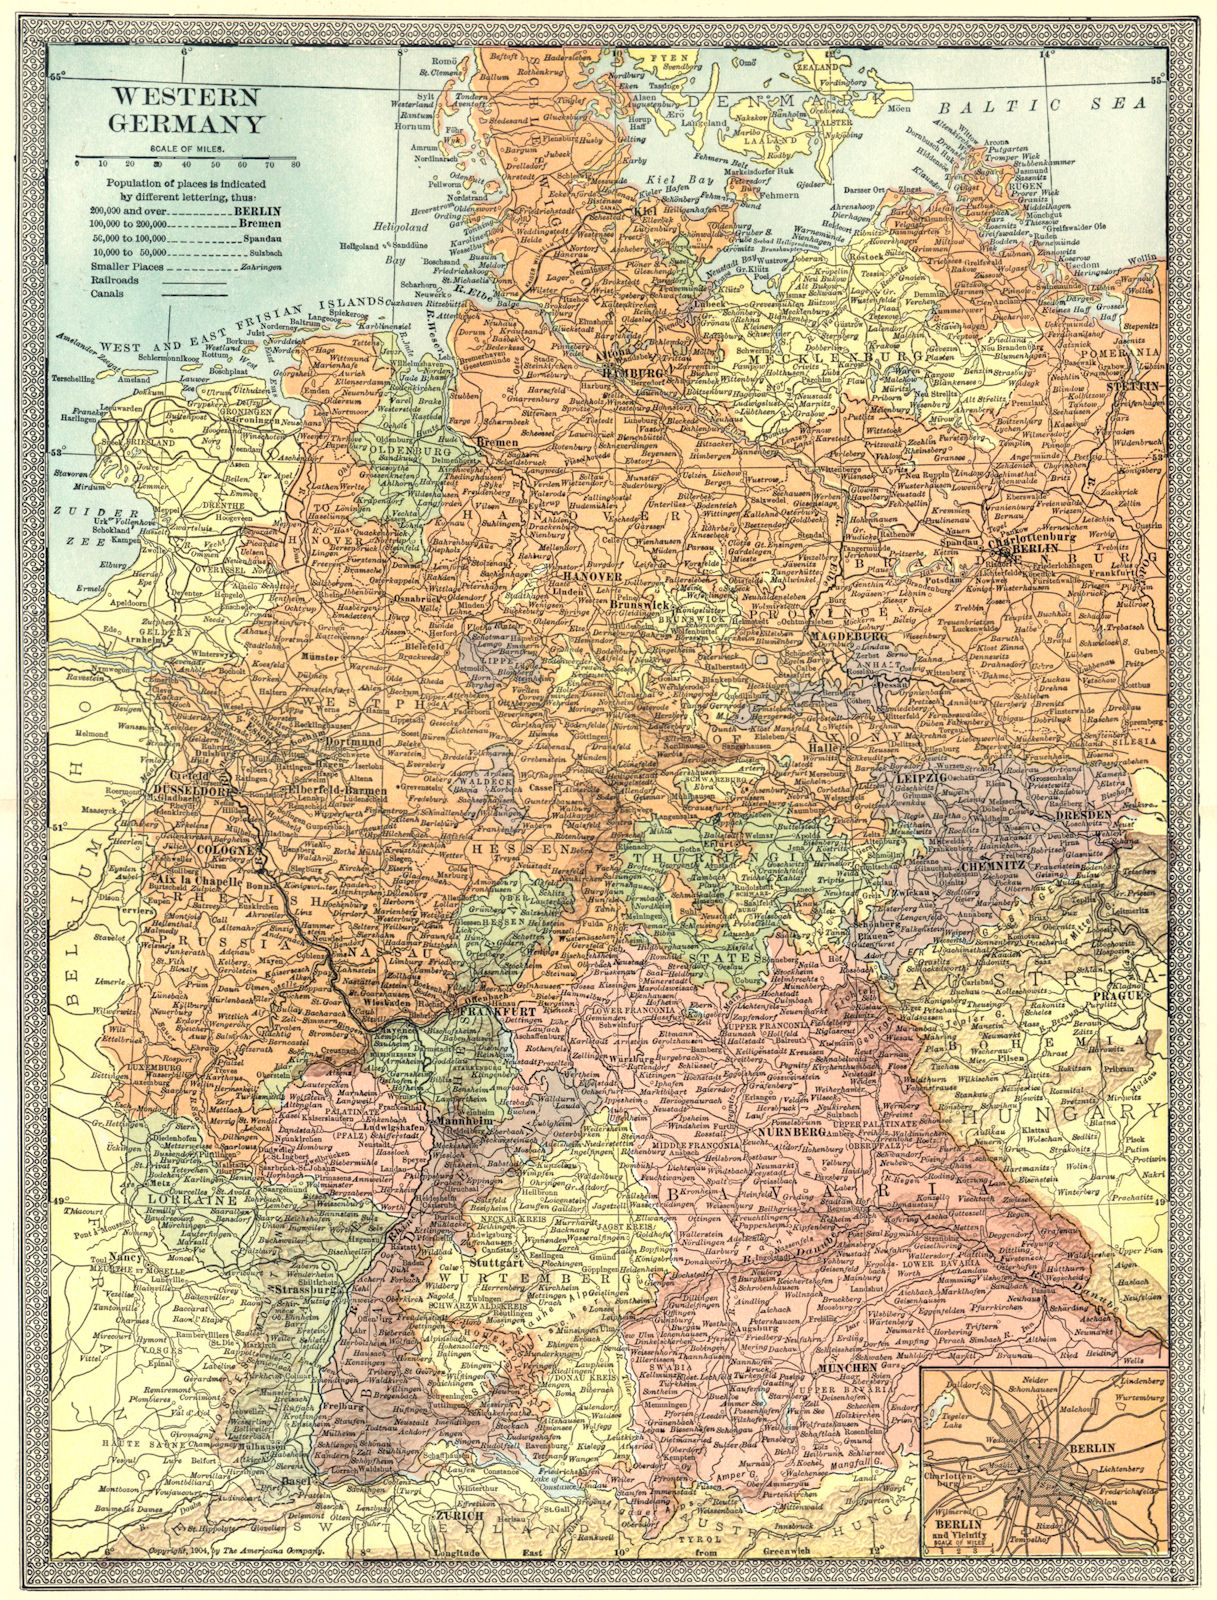 Associate Product WESTERN GERMANY. Berlin environs inset. Prussia 1907 old antique map chart